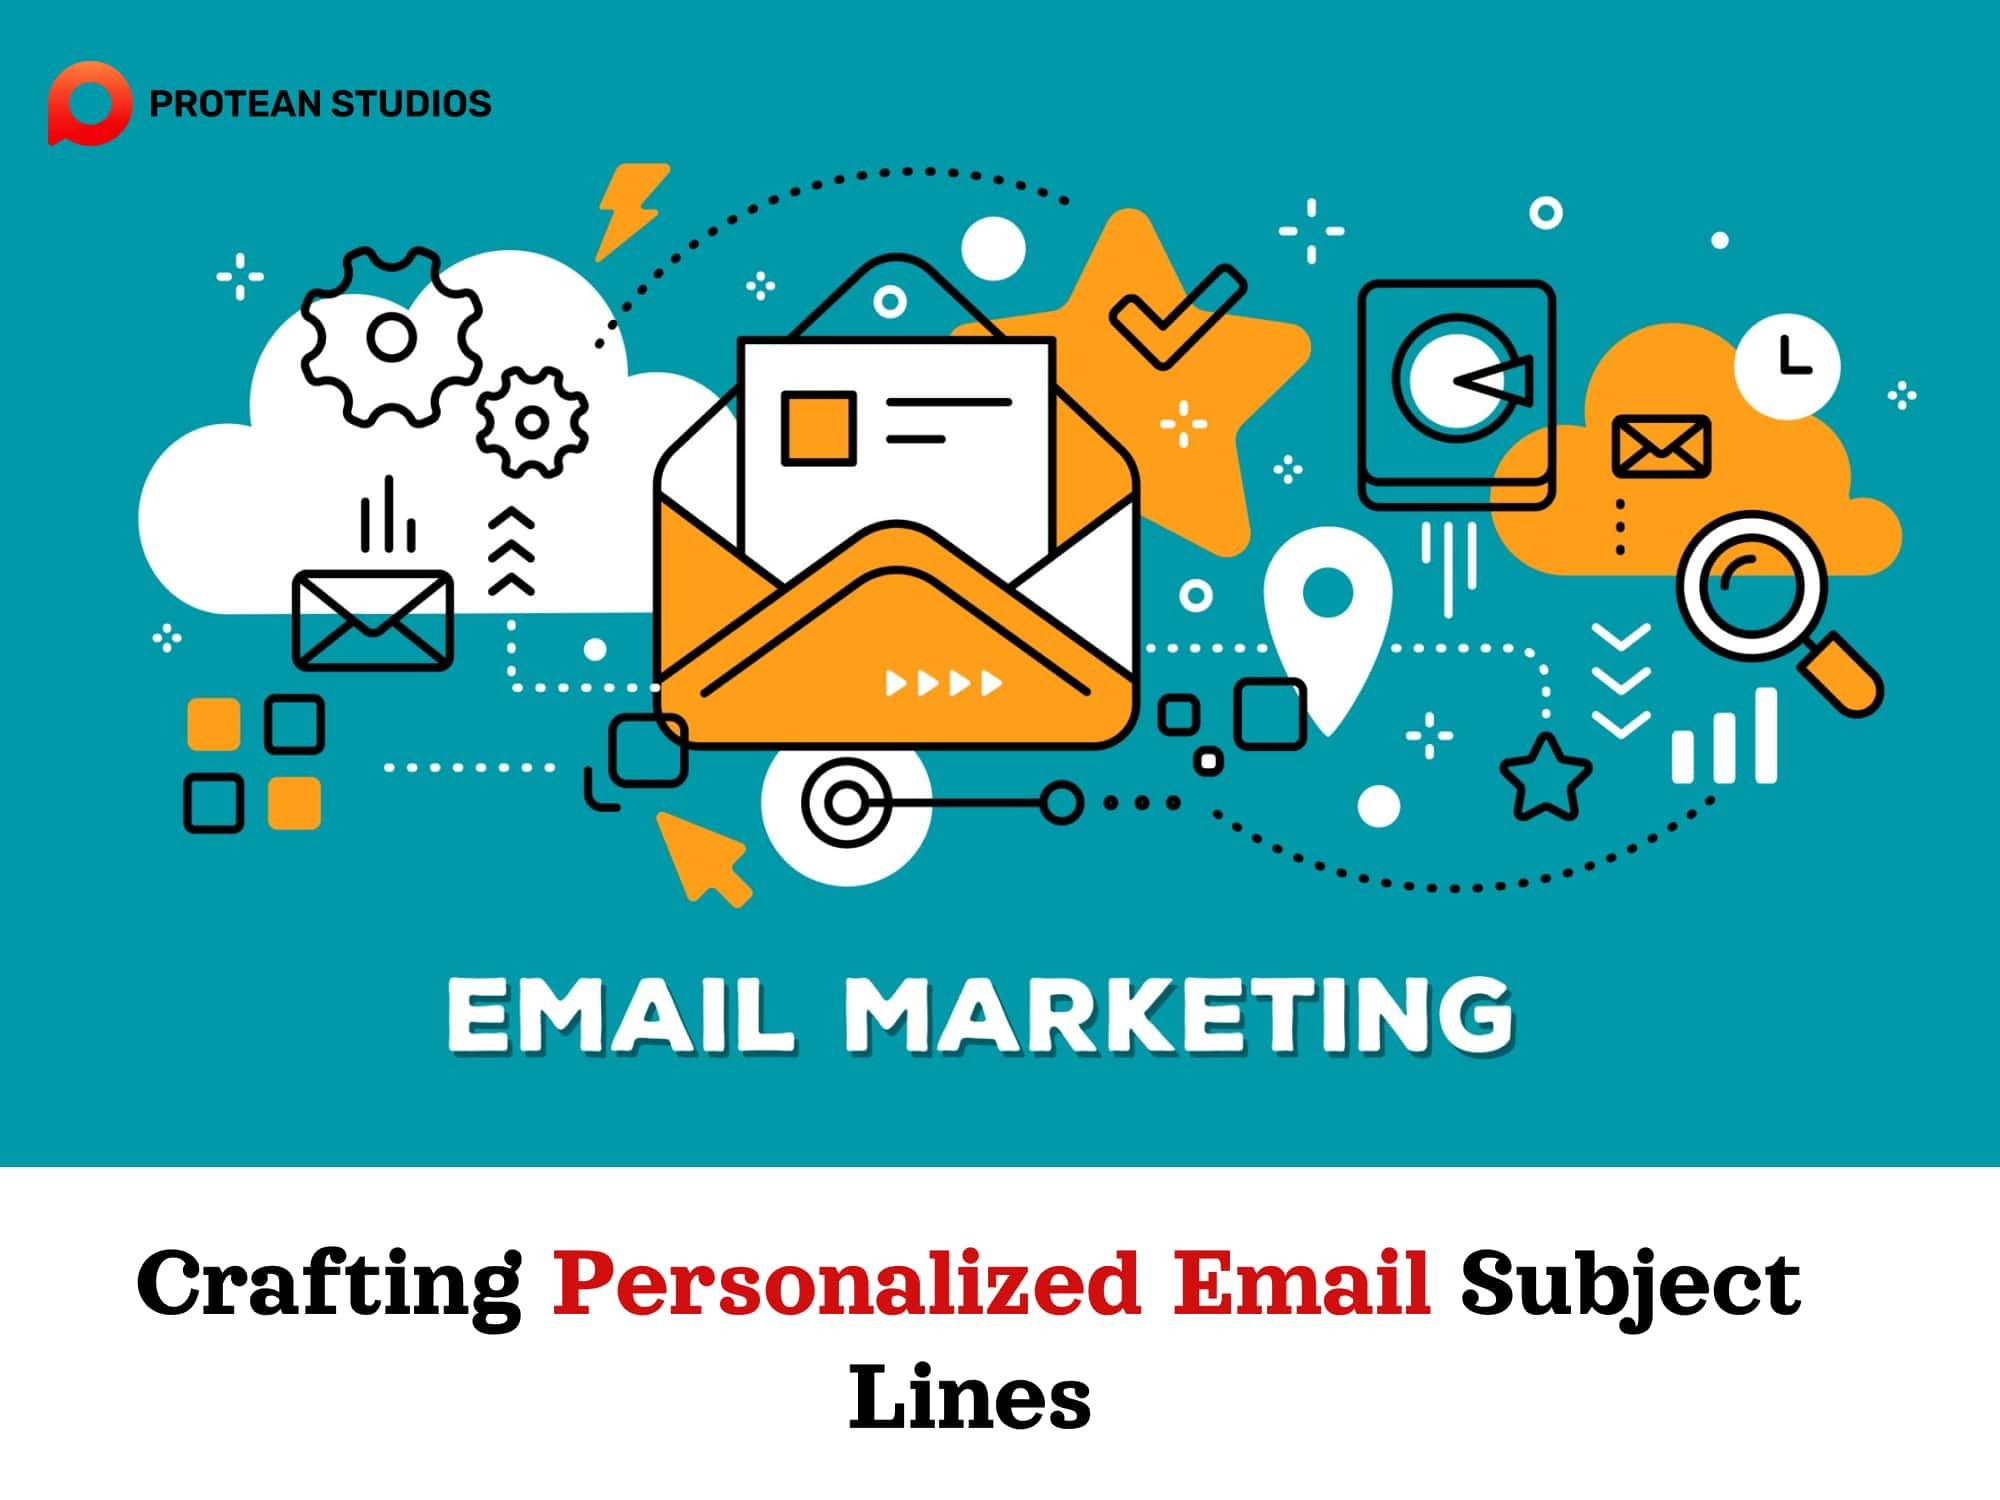 Email is a good way to personalize customers